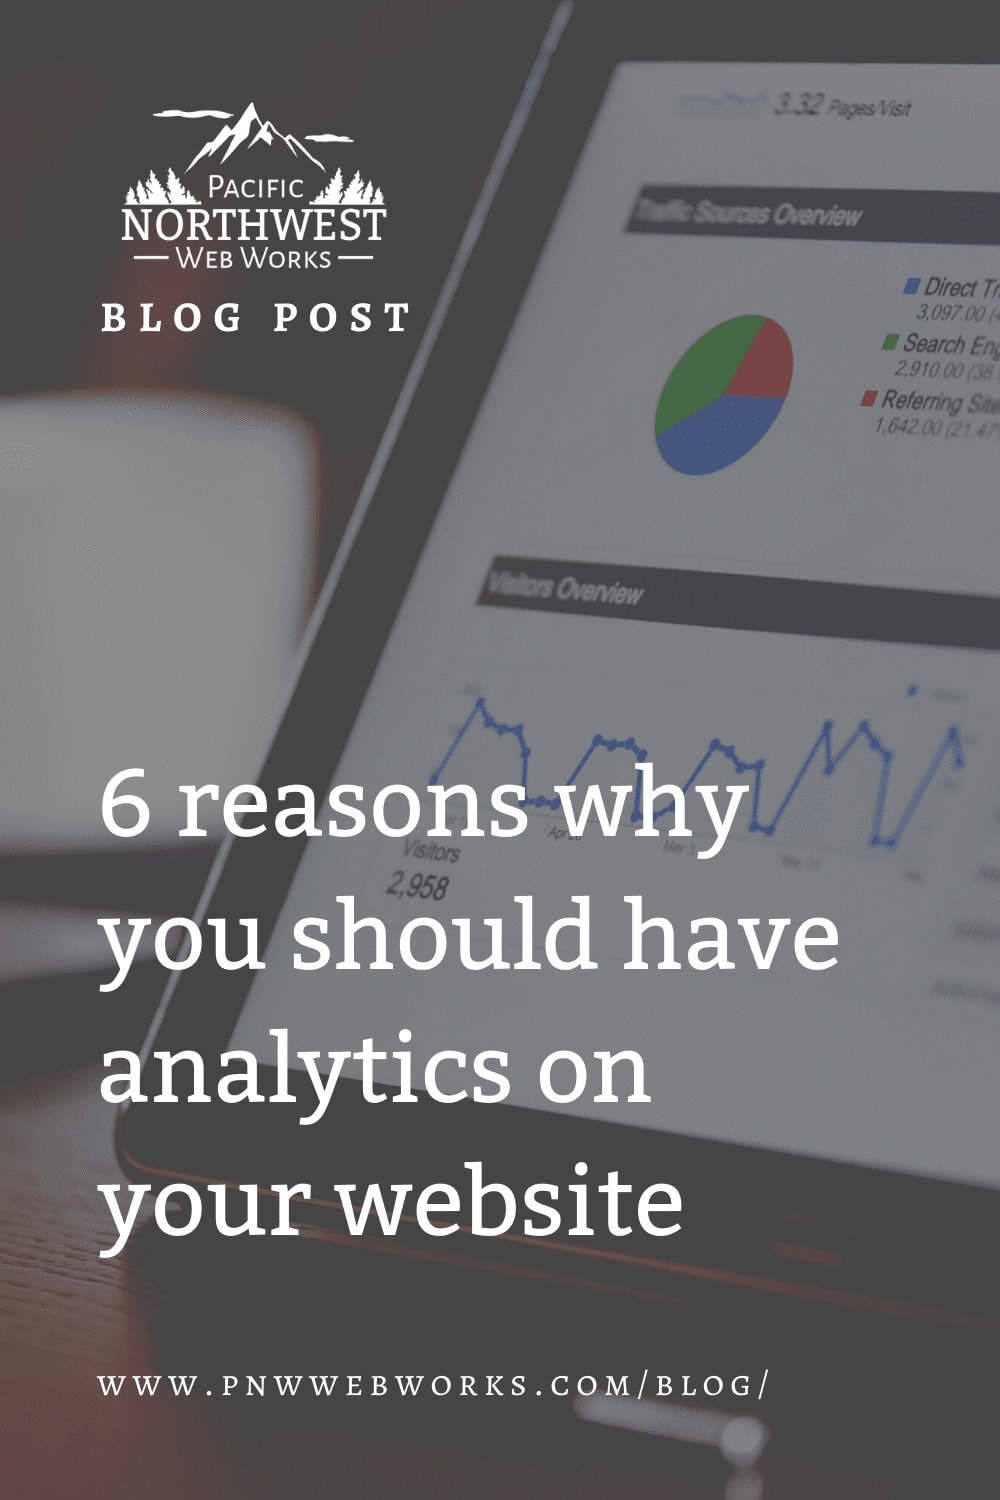 6 reasons why you should have analytics on your website